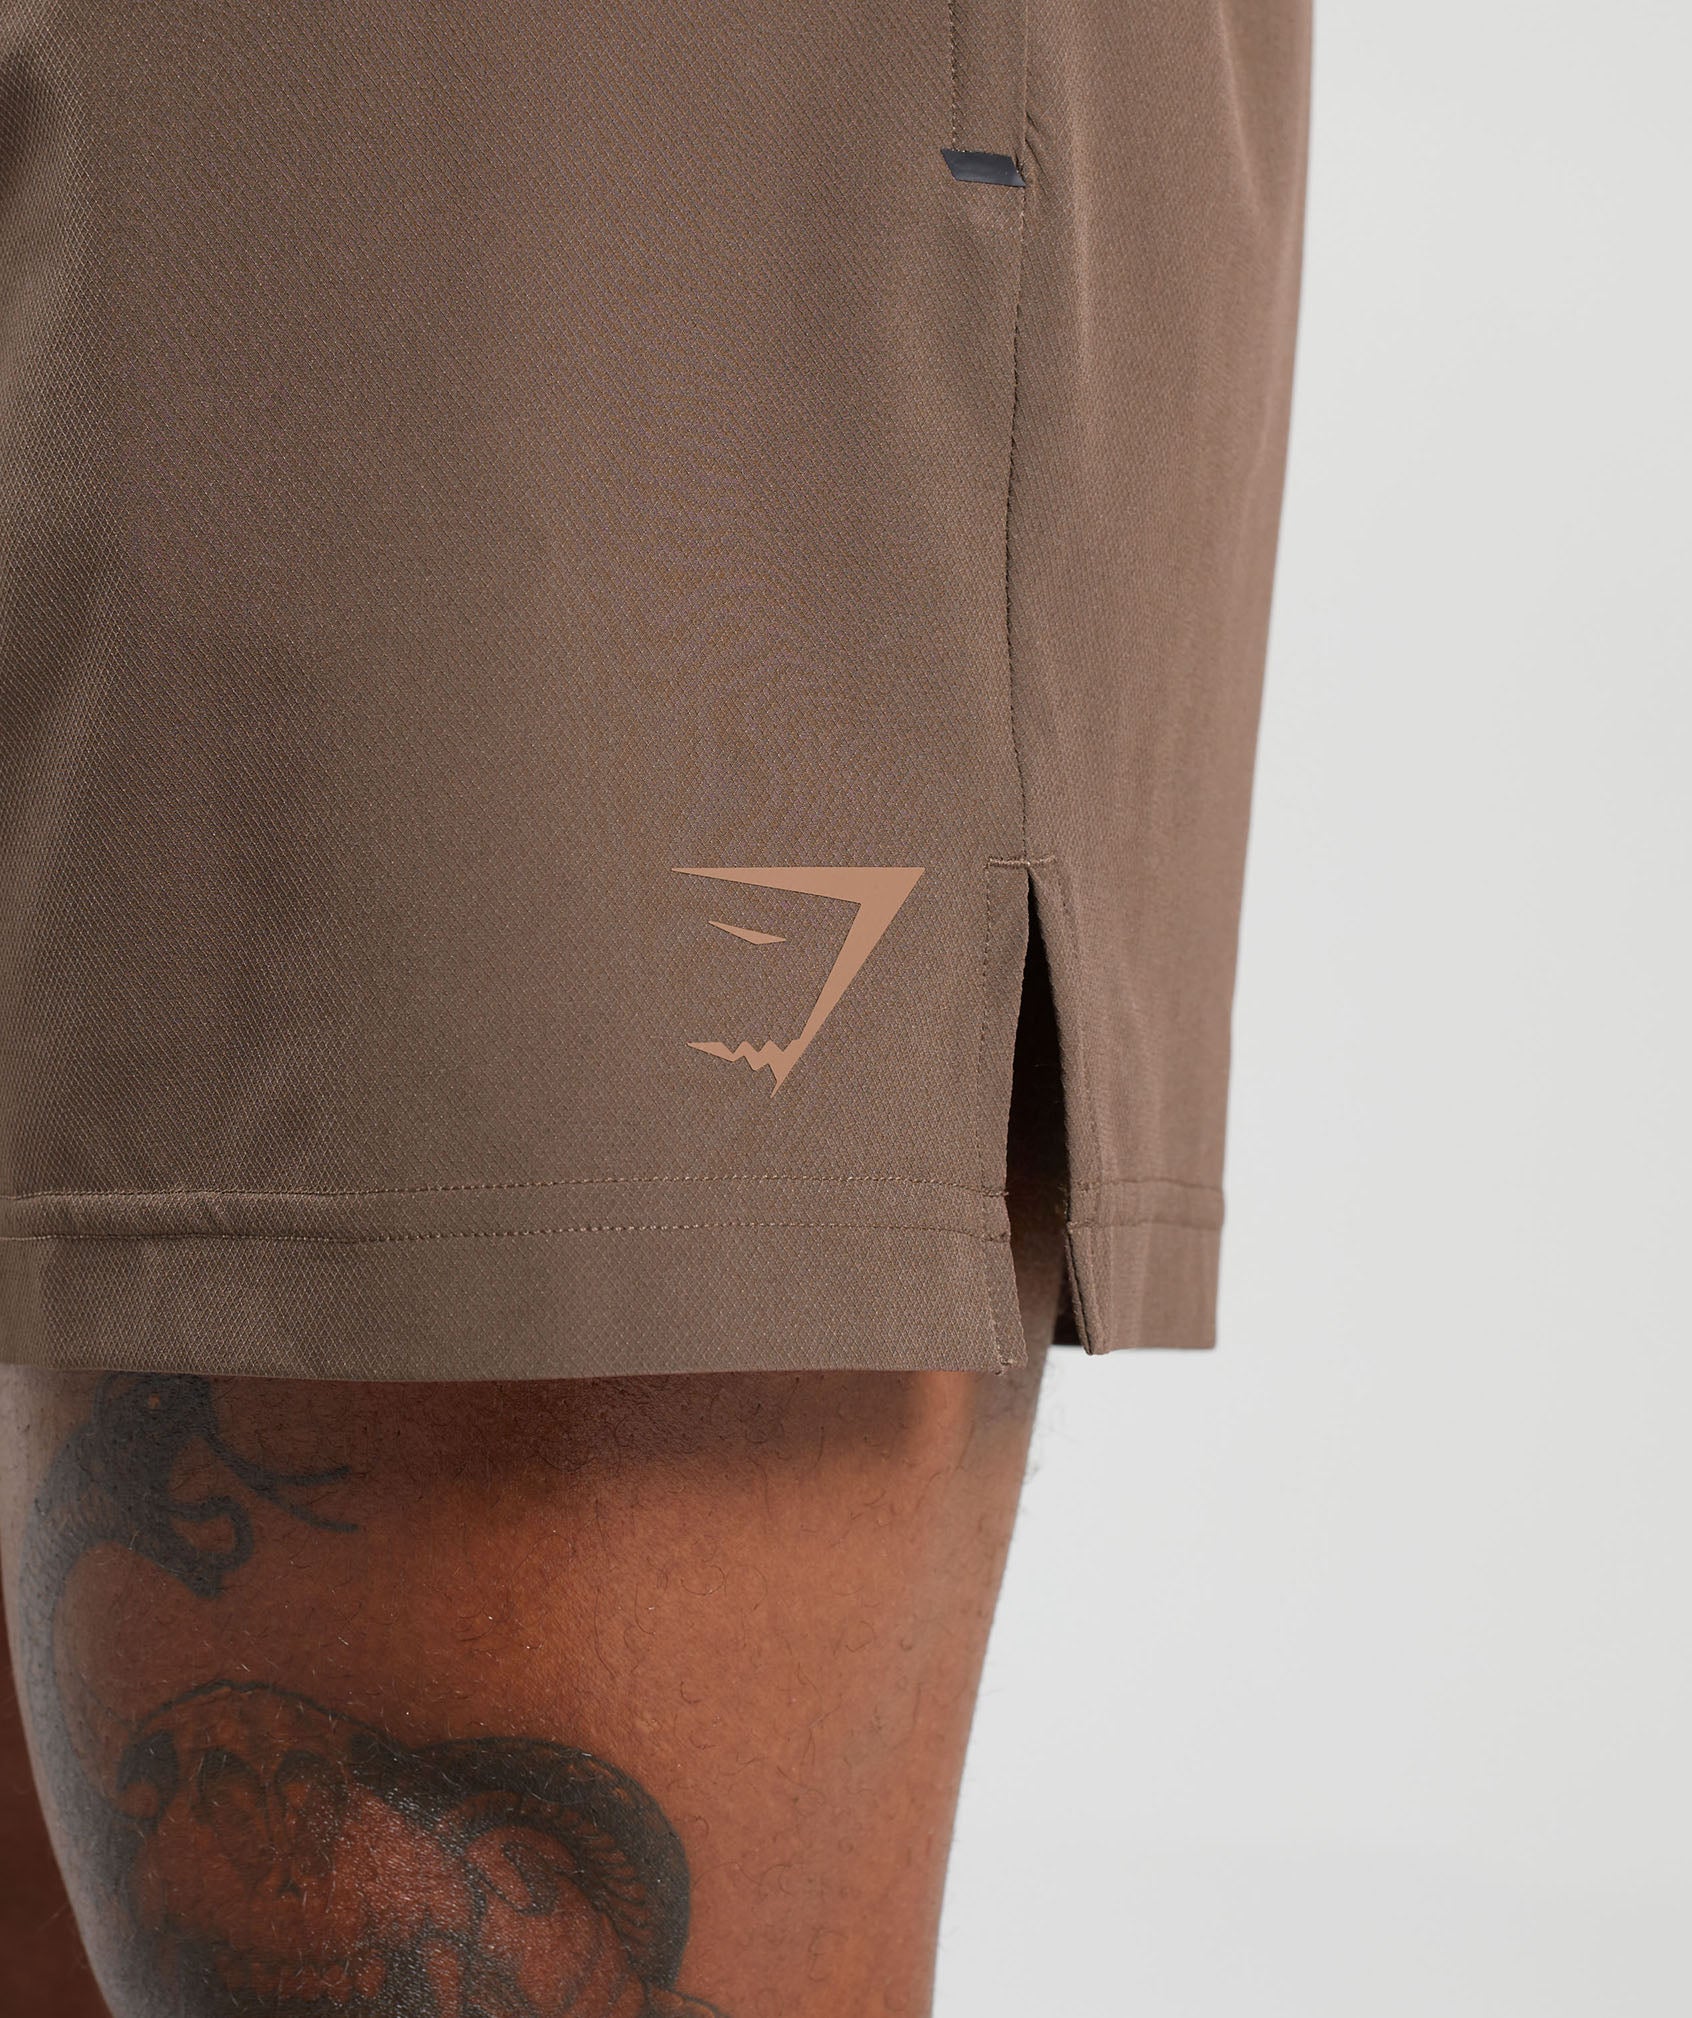 Apex 5" Hybrid Shorts in Soft Brown - view 6